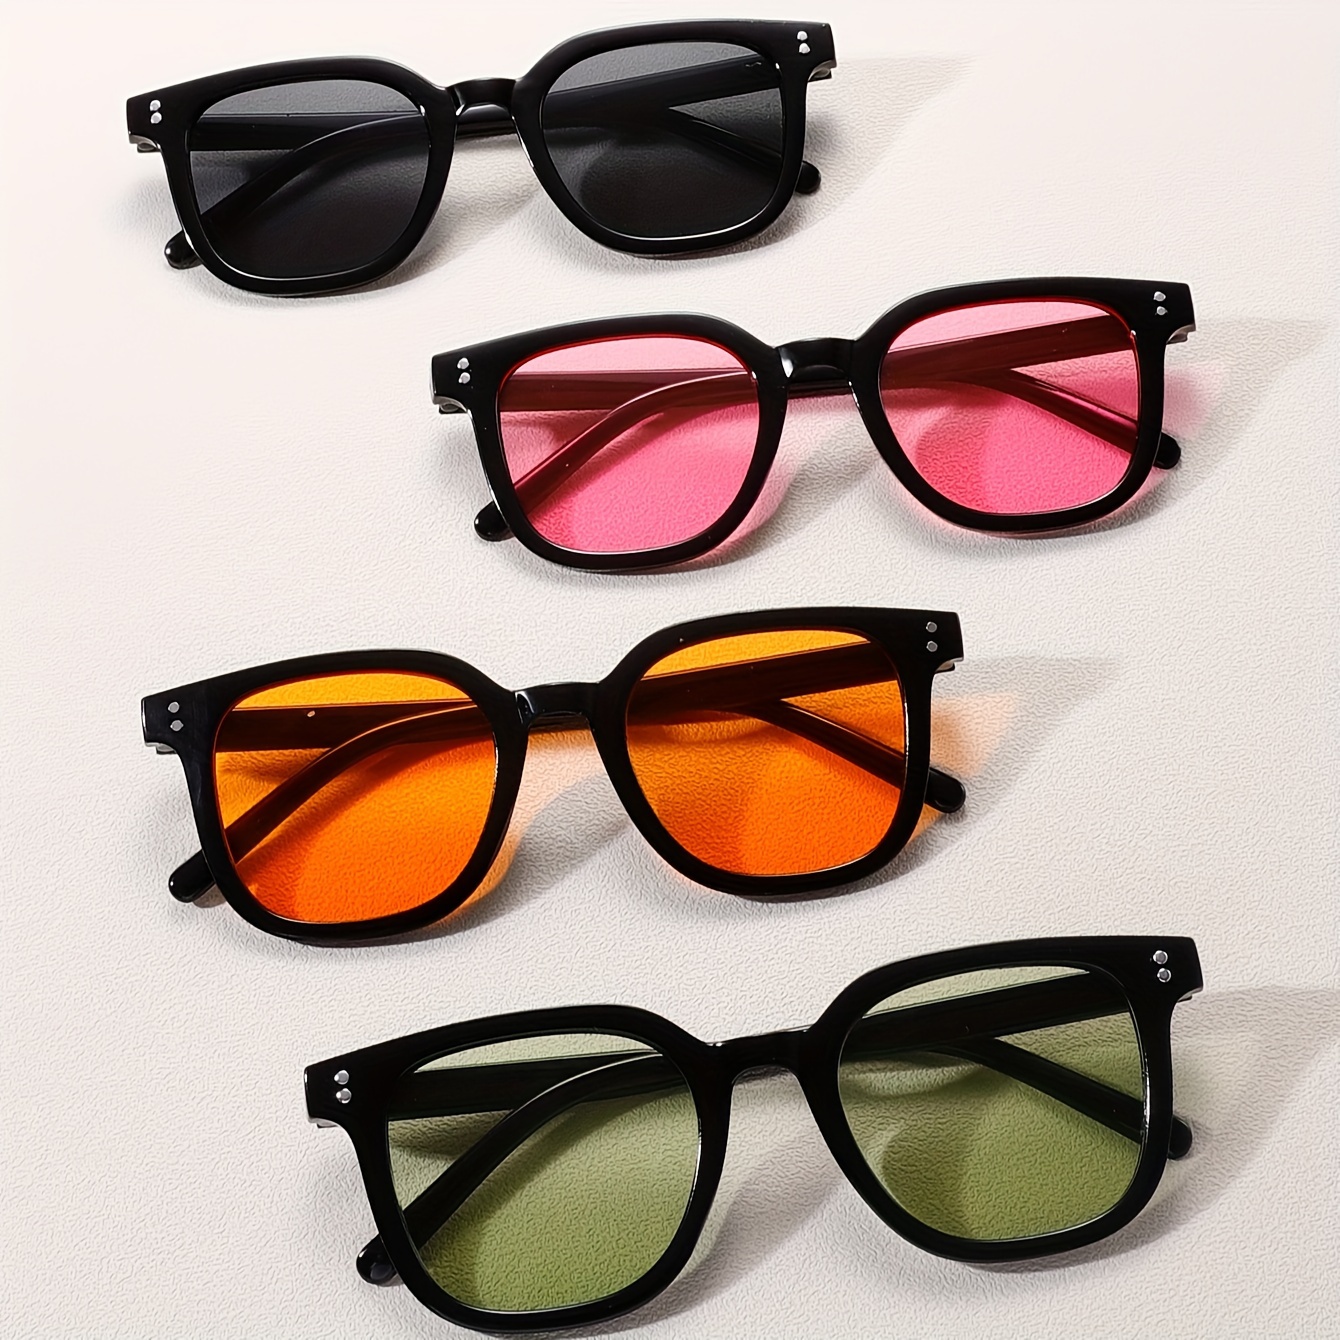 

4 Pairs Of New Fashion Glasses: Pure Desire Blush, Simple And Versatile Atmosphere For Big Face And Thin